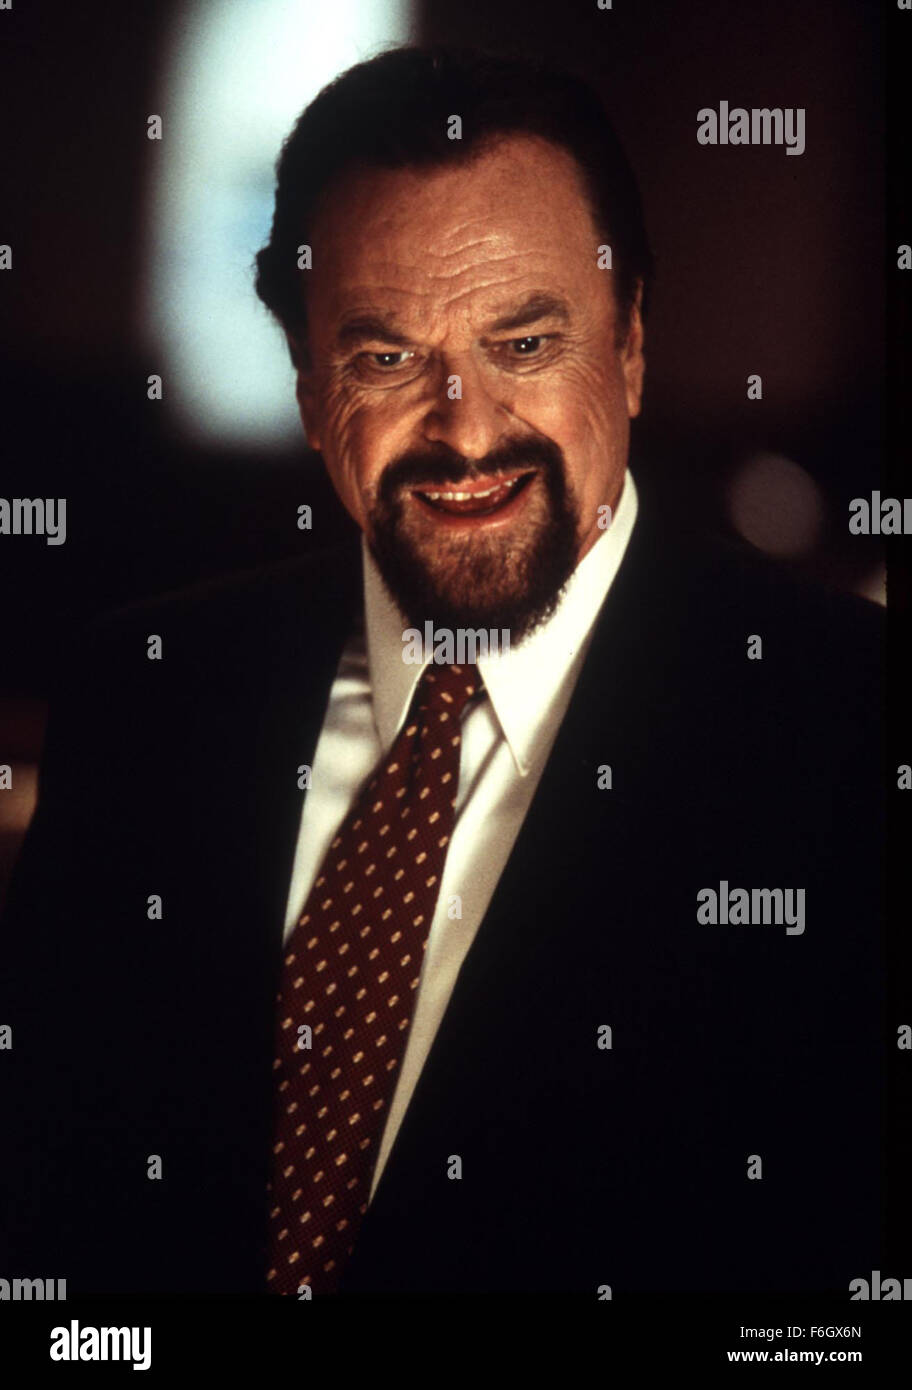 Apr 18, 2001; Vancouver, BC, CANADA; Actor RIP TORN stars as Jim Brody in 'Freddy Got Fingered.' Stock Photo